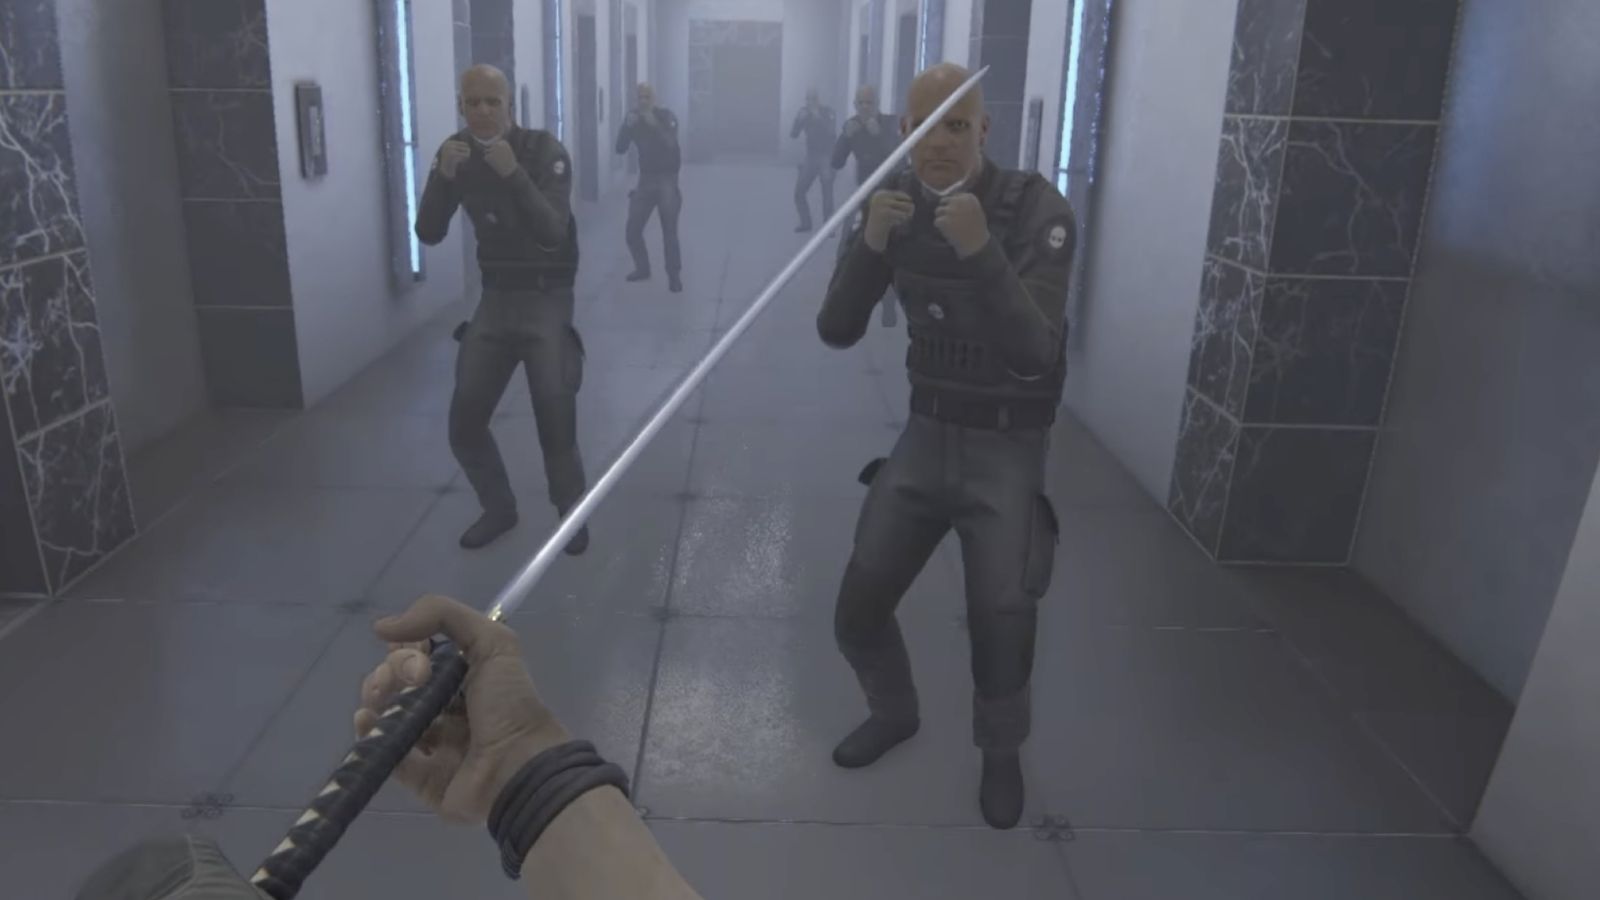 Player wields a samurai sword in front of a corridor filled with guards - Bonelab stuck on loading screen